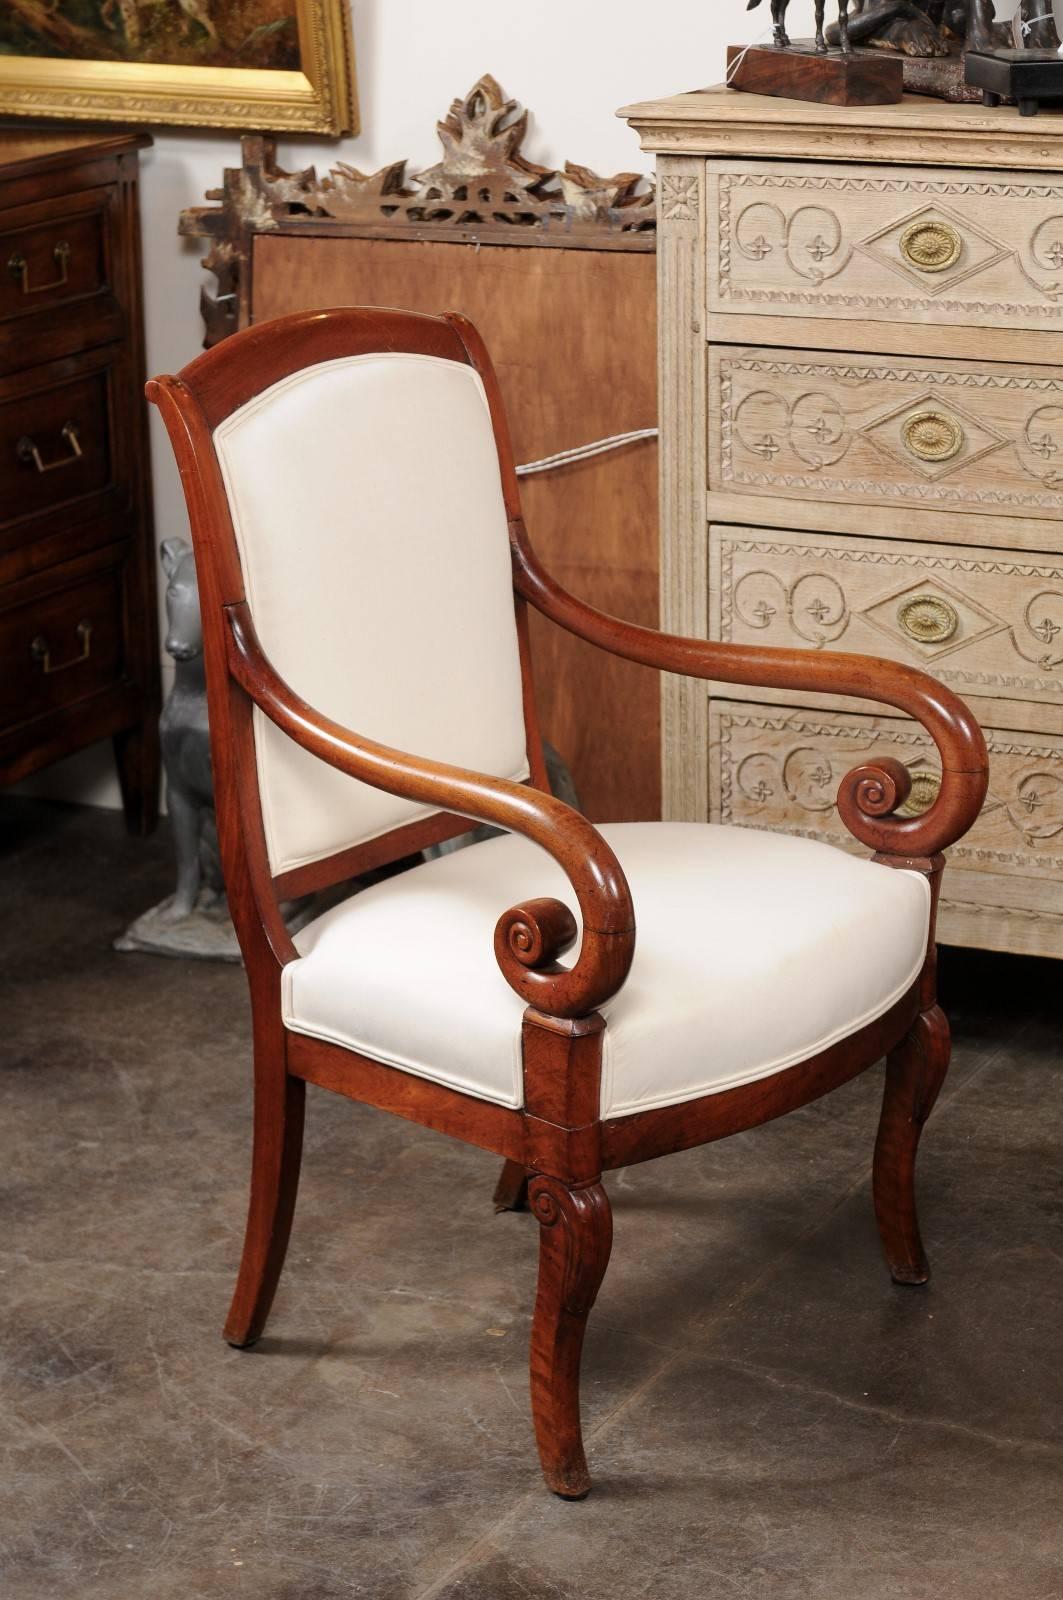 Muslin Pair of French Mid-19th Century Empire Style Walnut Fauteuils with Volute Arms